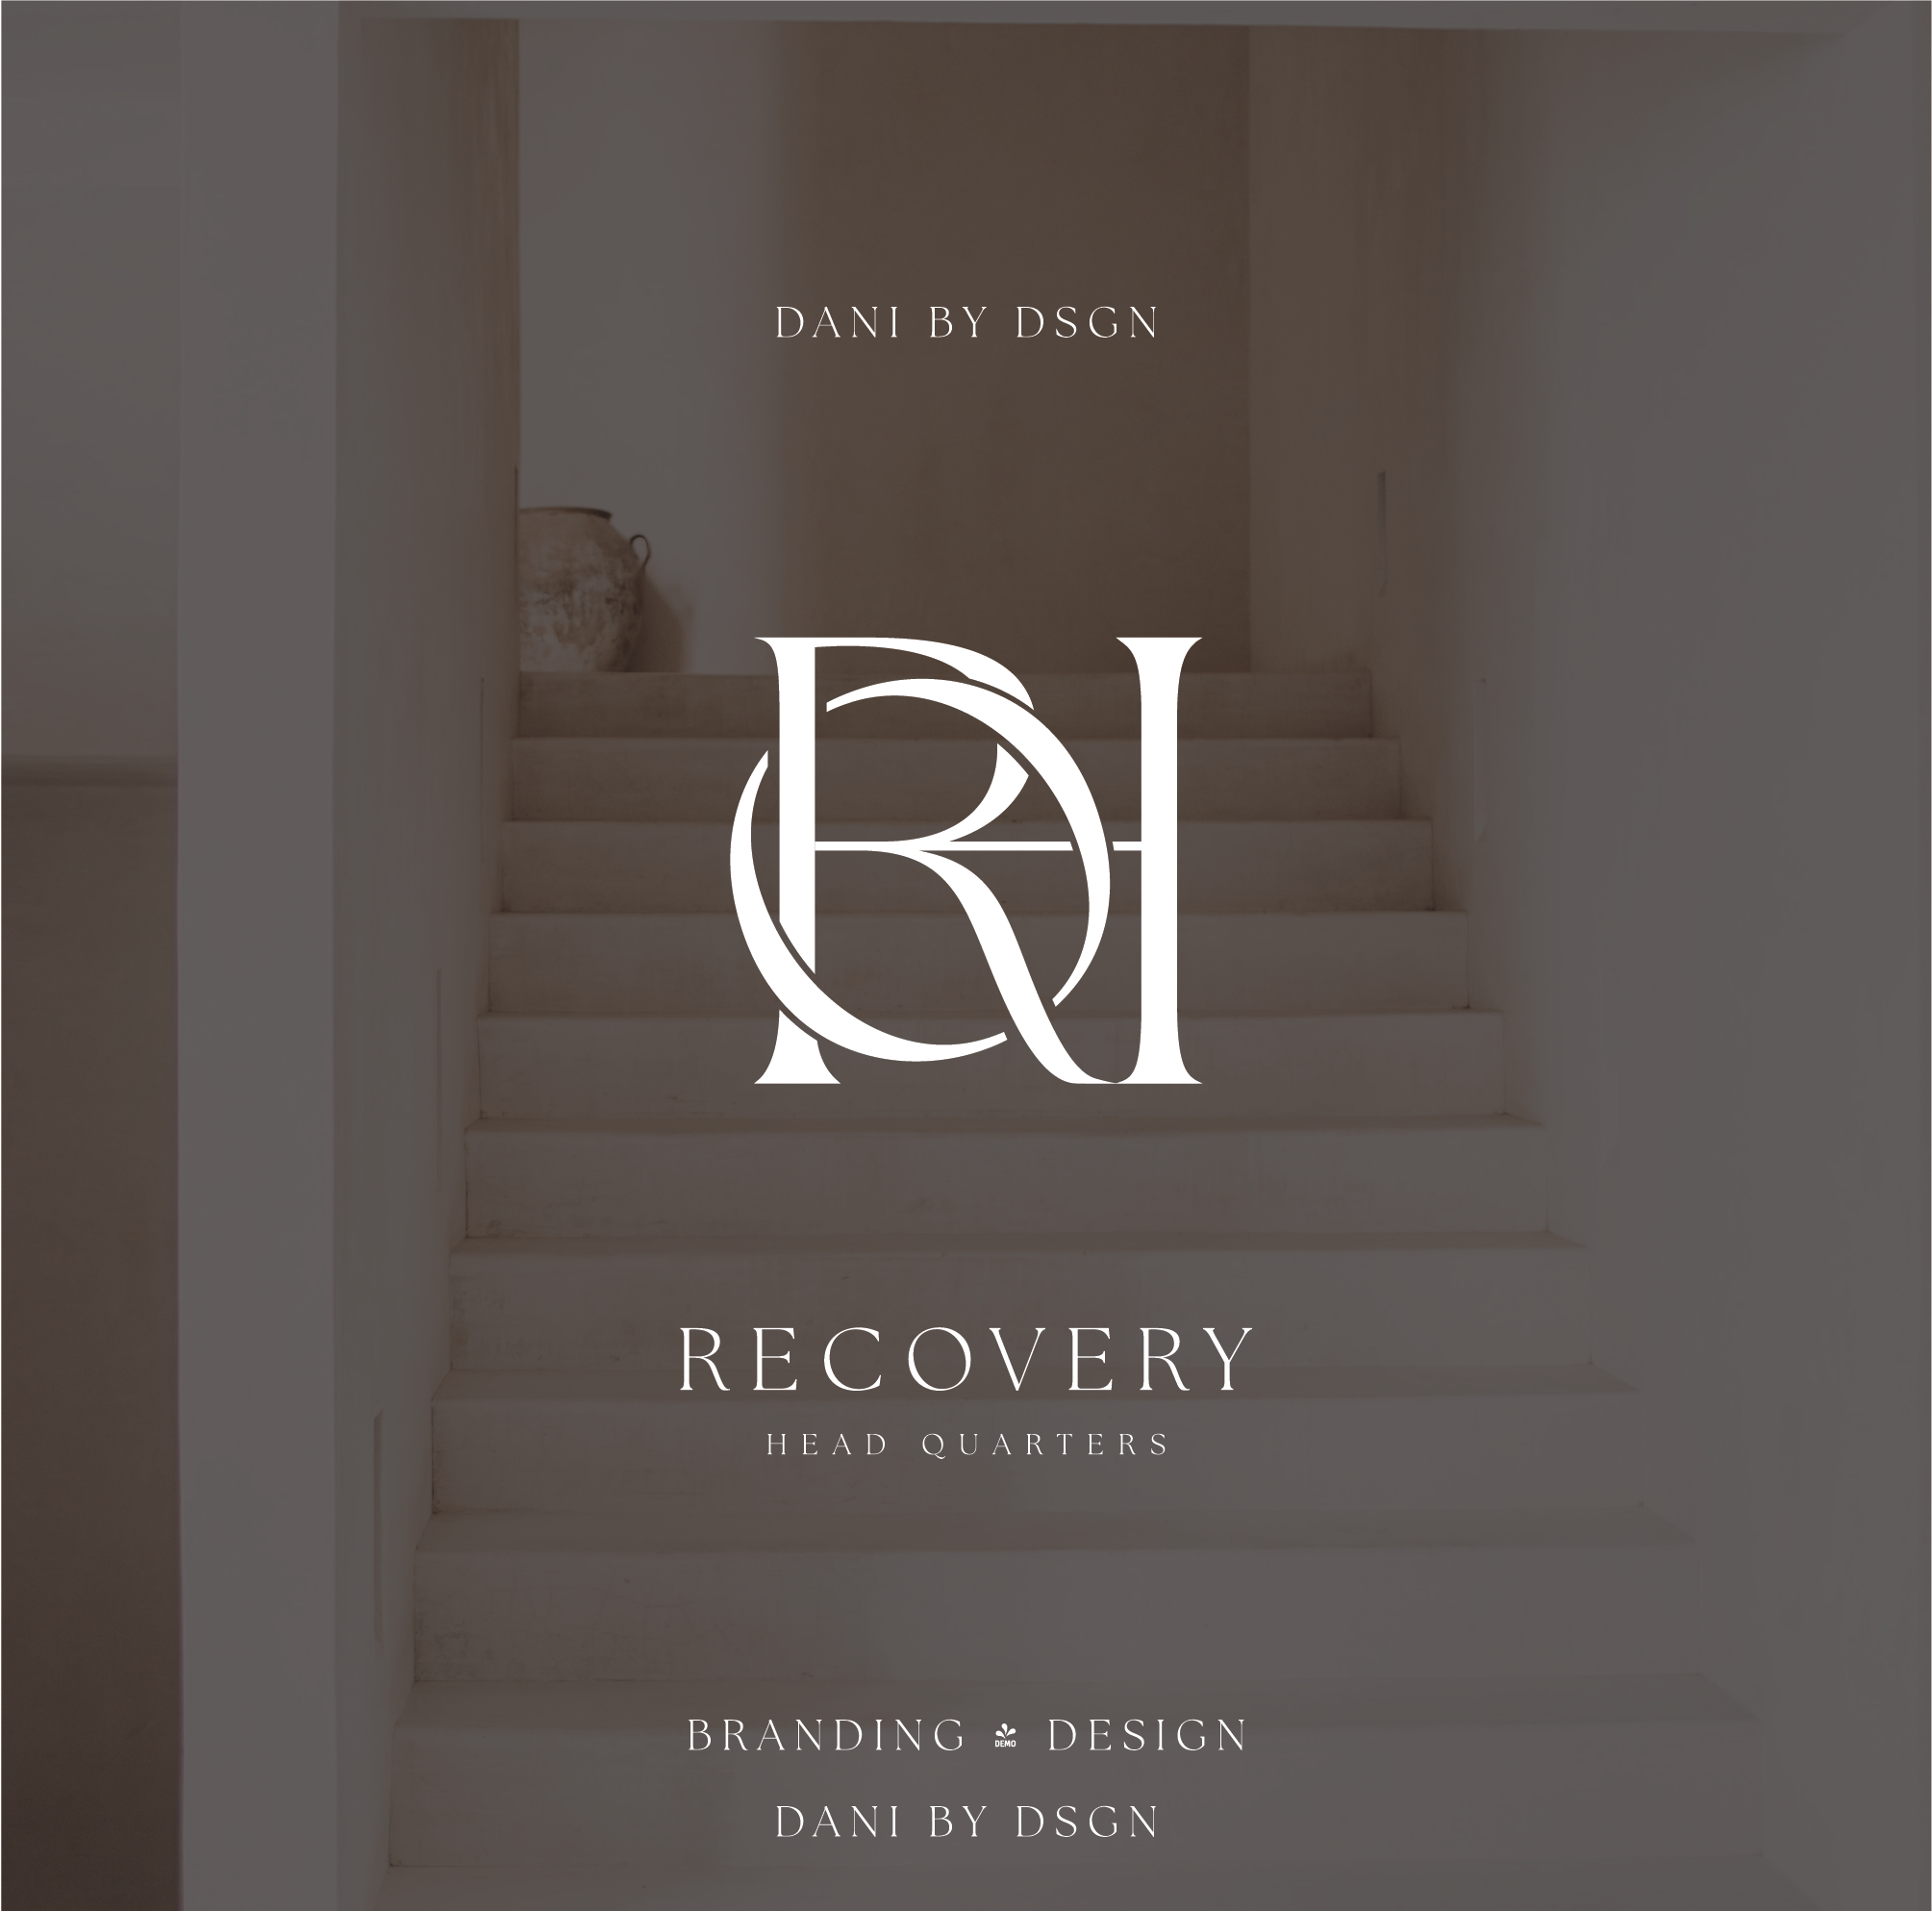 The initials RQH for Recover Head Quarters designed into a initial monogram business logo.  Initials are in capitals and overlapped to create a striking design.